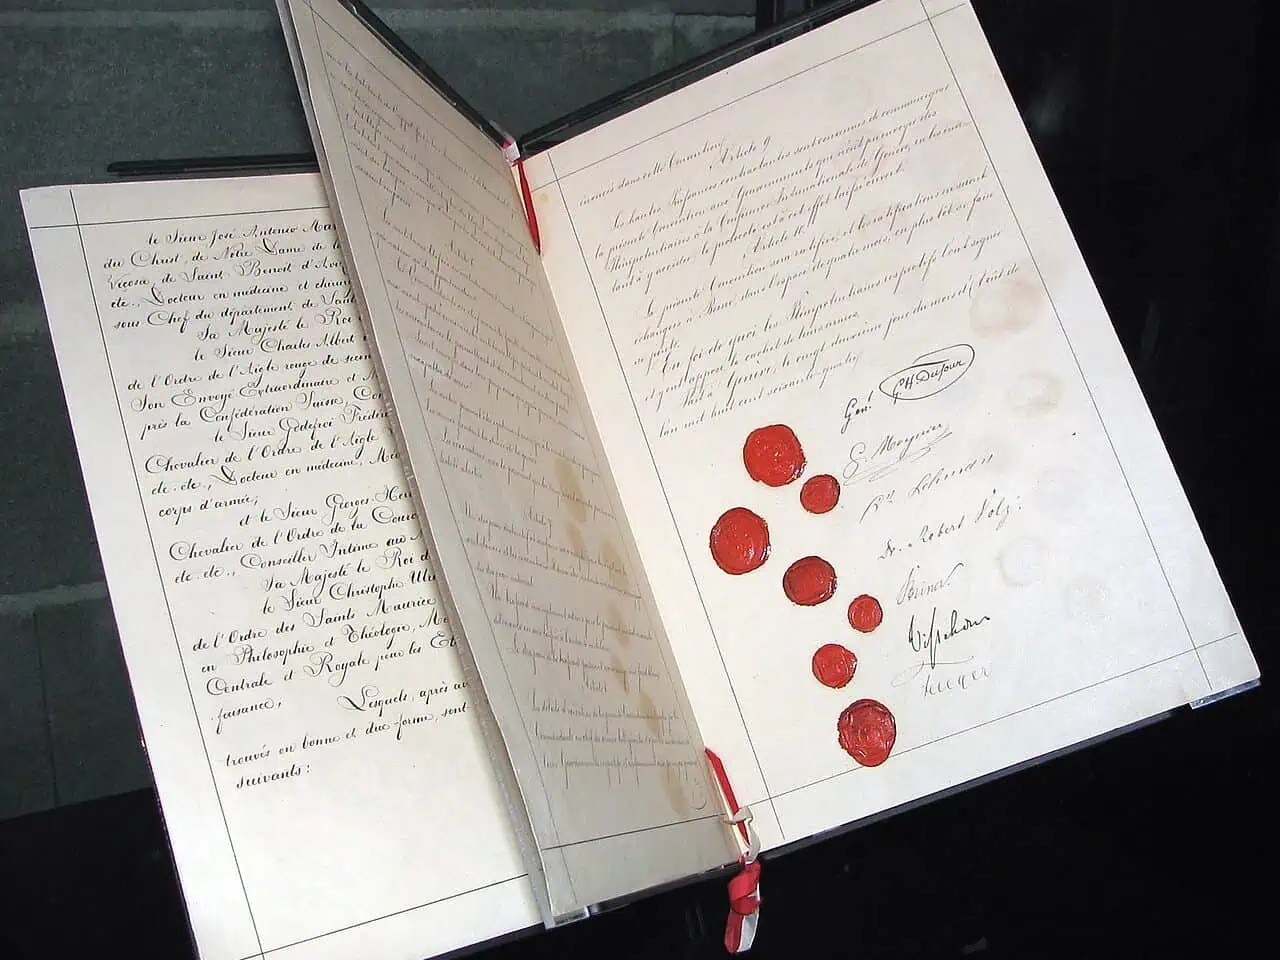 A facsimile of the signature-and-seals page of the 1864 Geneva Convention, that established humane rules of war.